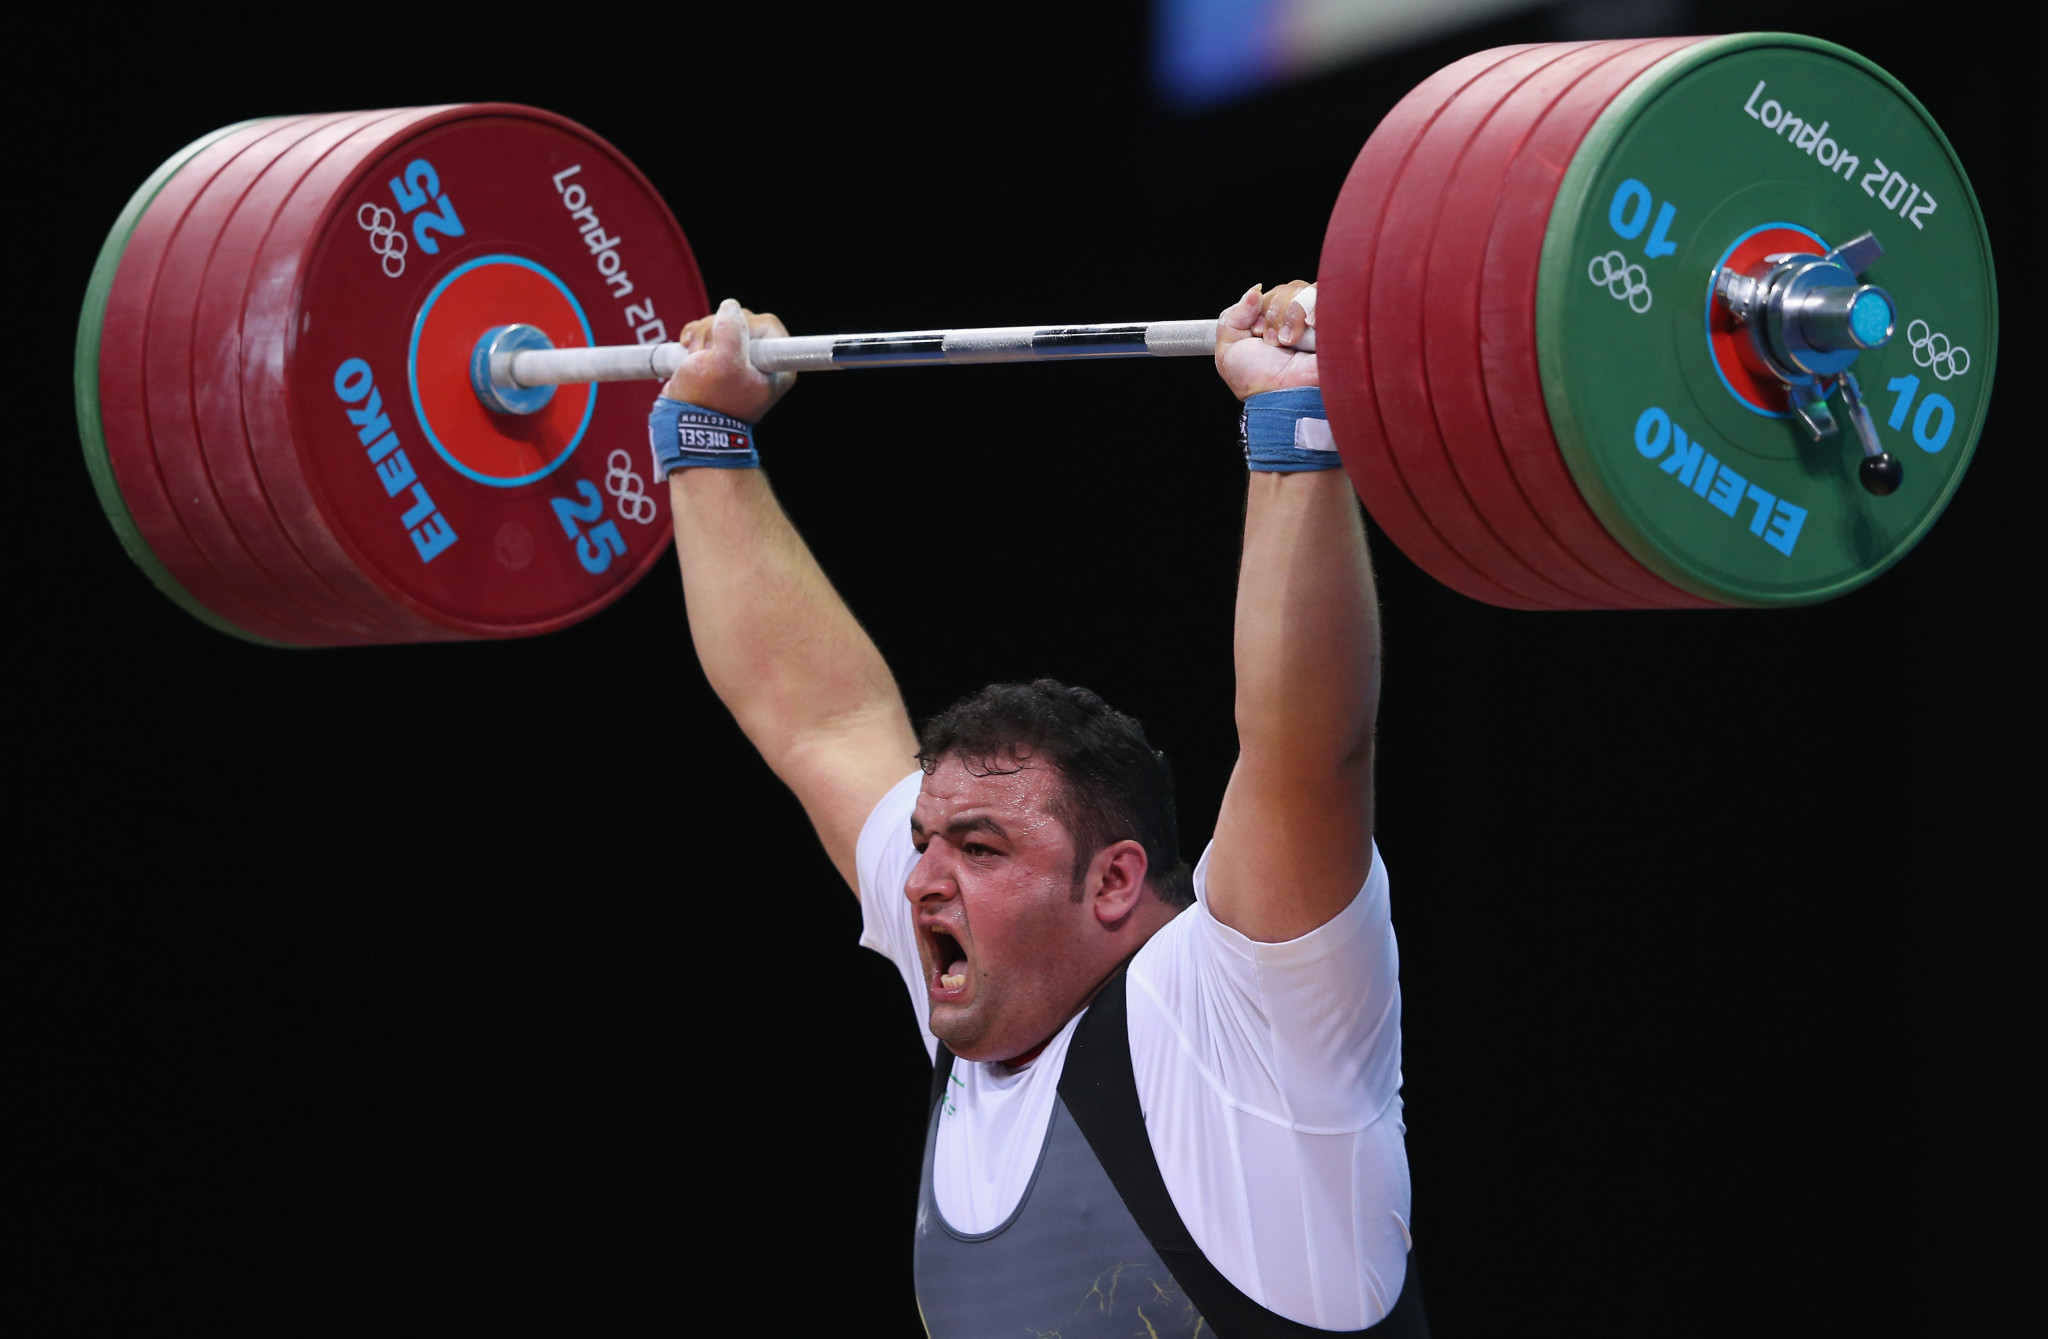 Sajjad Anoushirivani has been elected as President of the Iranian Weightlifting Federation ©Getty Images